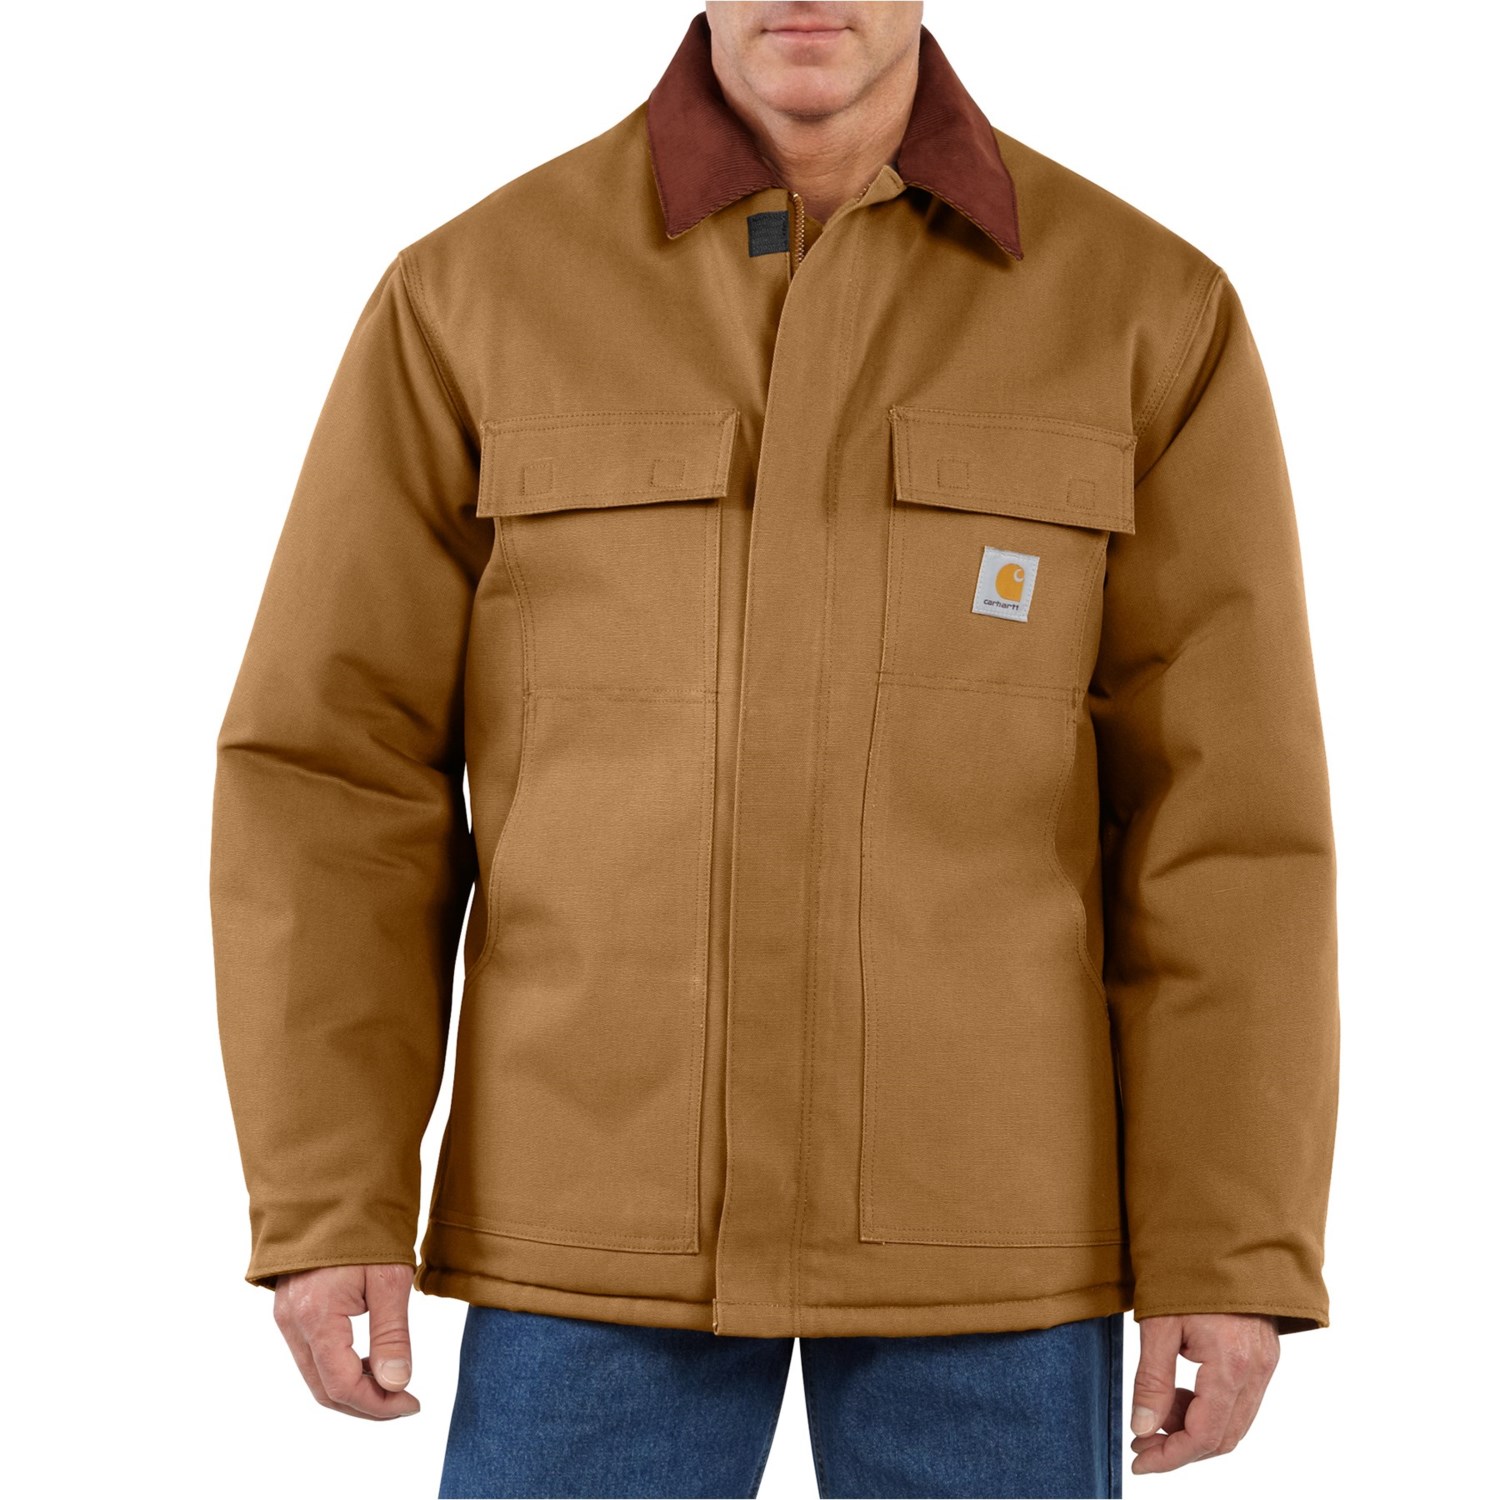 Carhartt C003 Traditional Quilt-Lined Duck Work Coat (For Big and Tall Men)